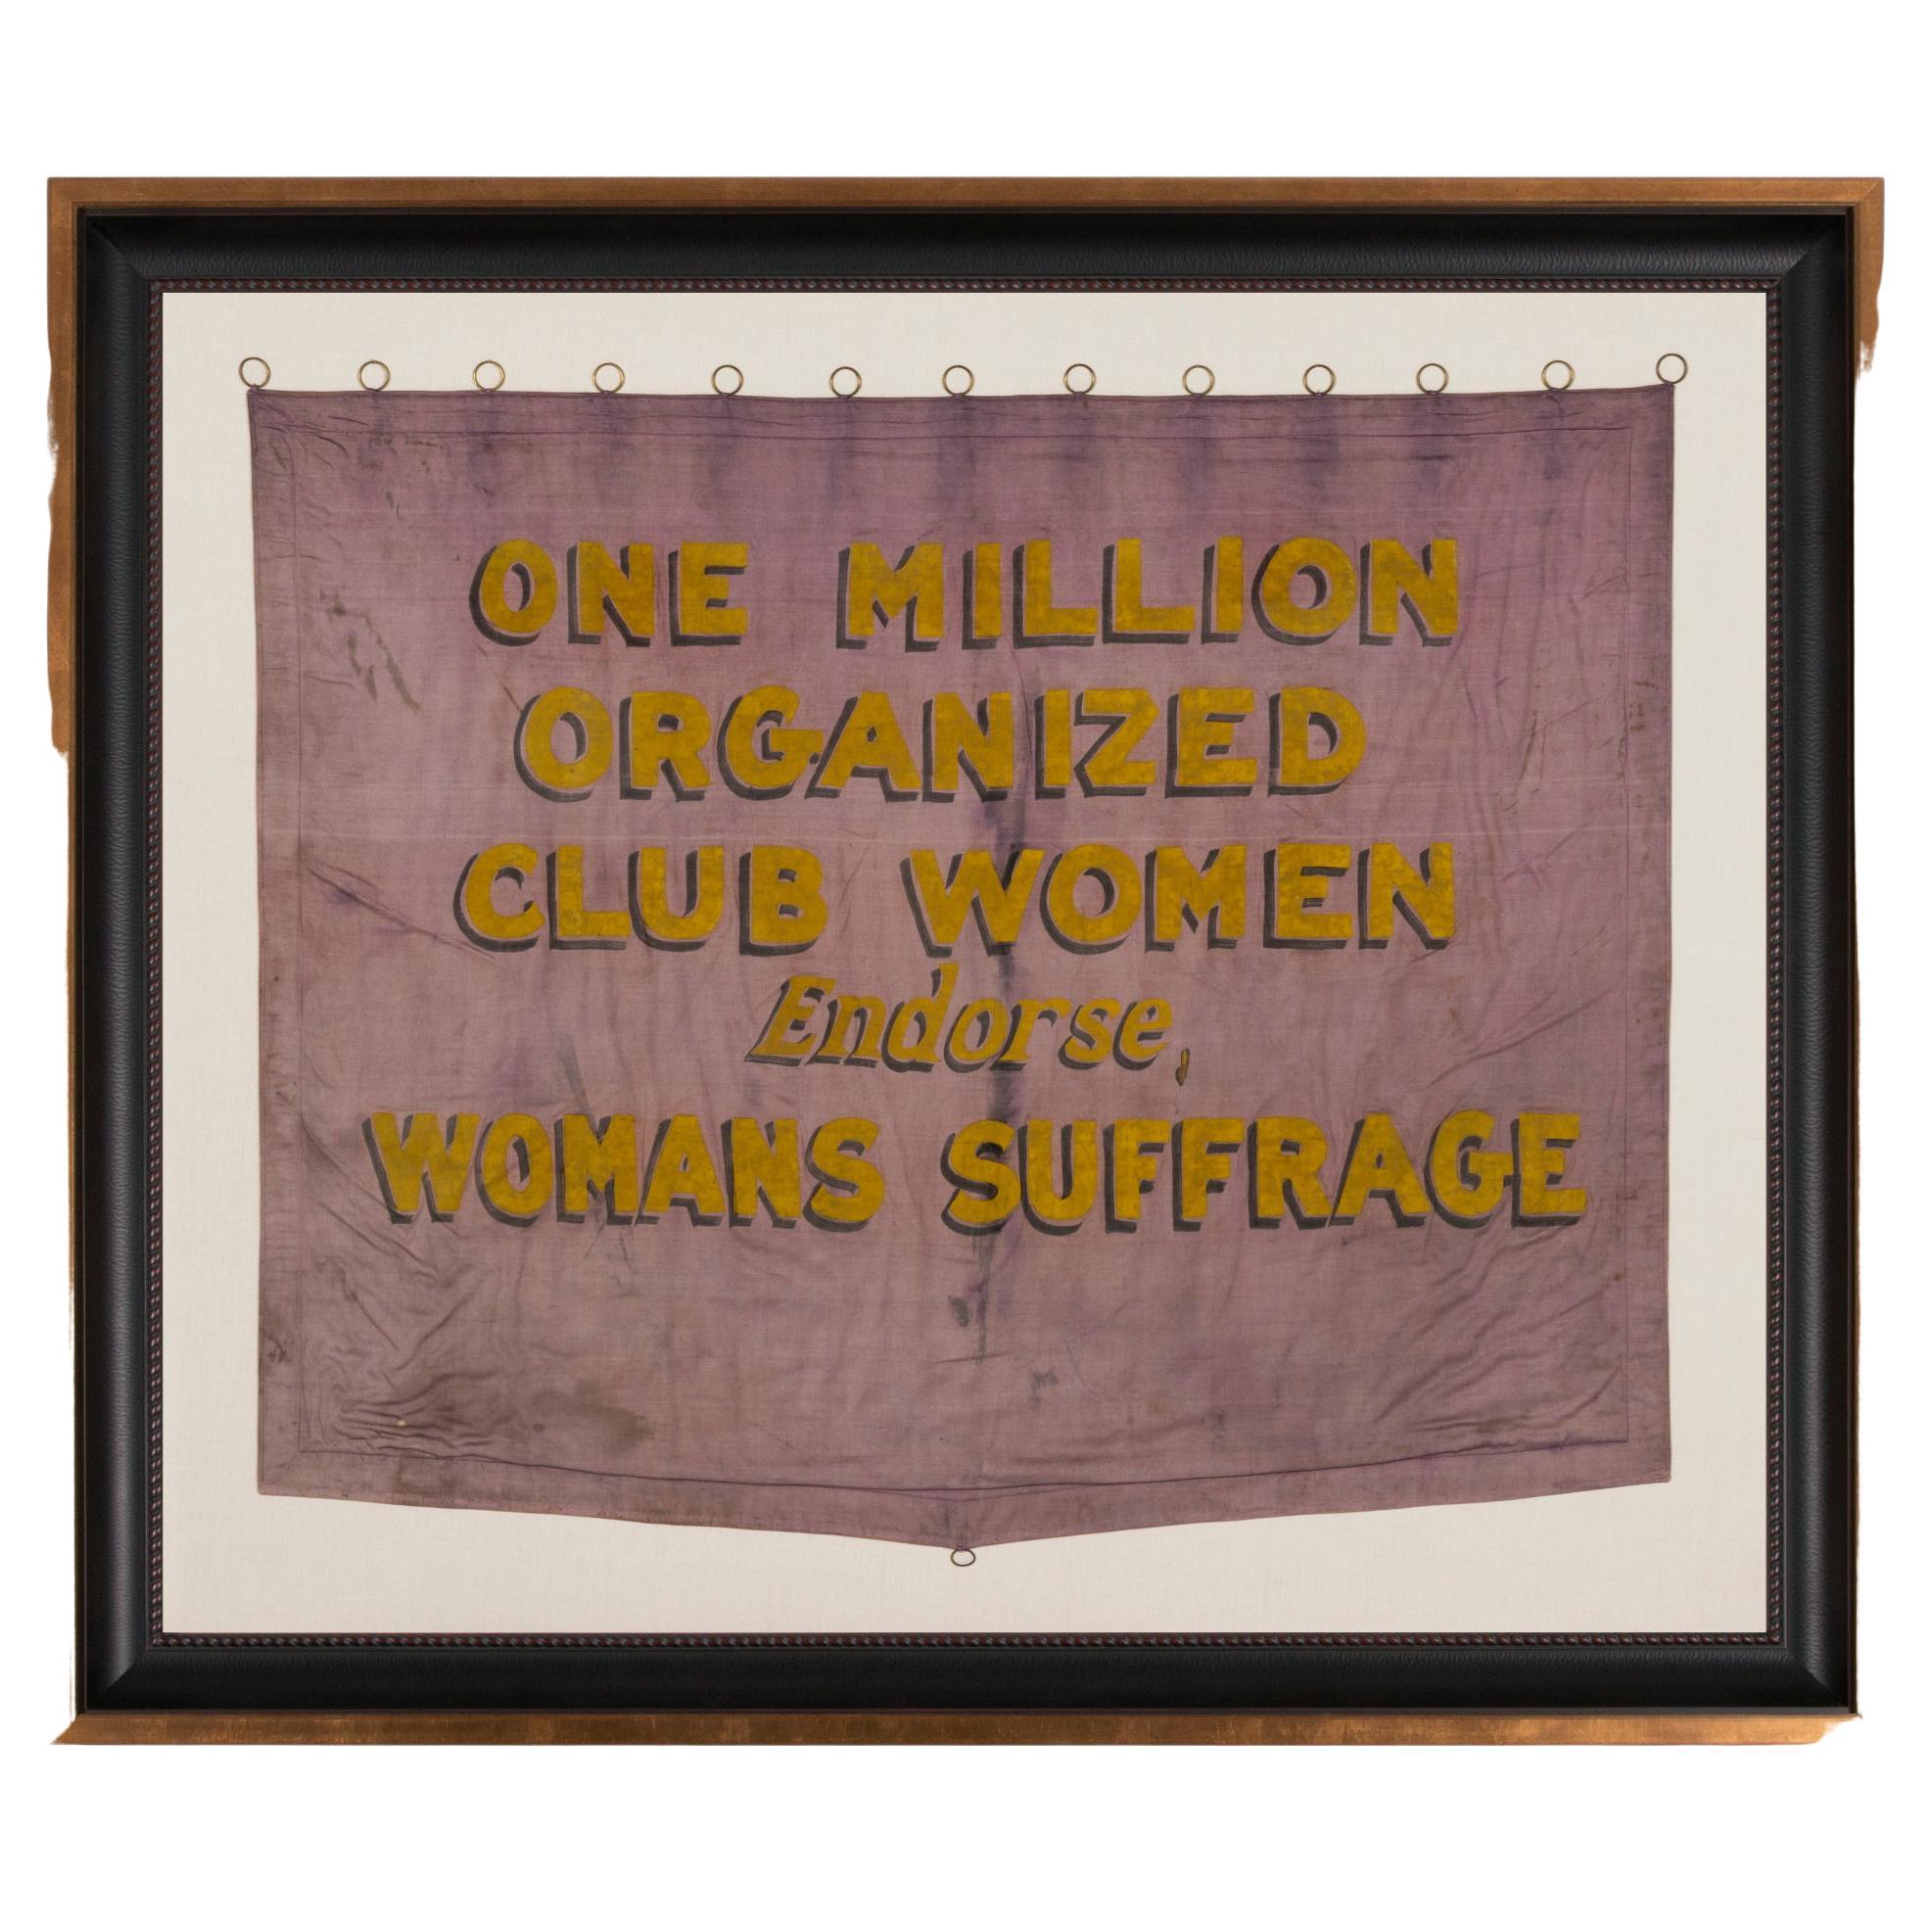 Rare violet & yellow Suffragette parade banner, the plate example illustrated in the text reference on the subject, made ca 1910-1920.

Hand-painted banners of this nature were carried by Suffragettes in parades and rallies throughout America.